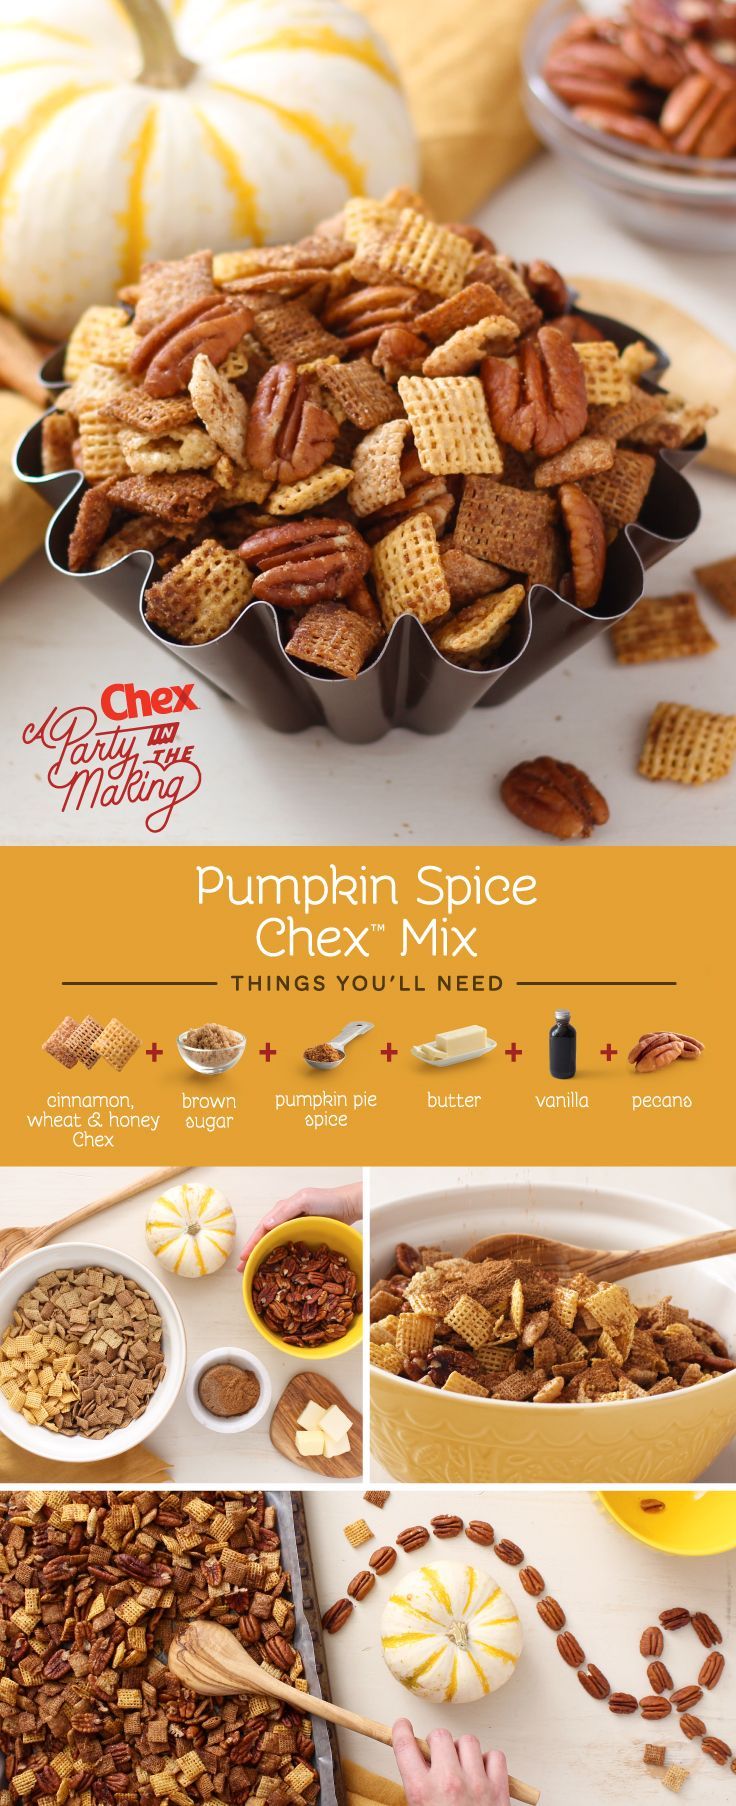 Don’t limit pumpkin spice to lattes! Homemade Pumpkin Spice Chex Mix has all the